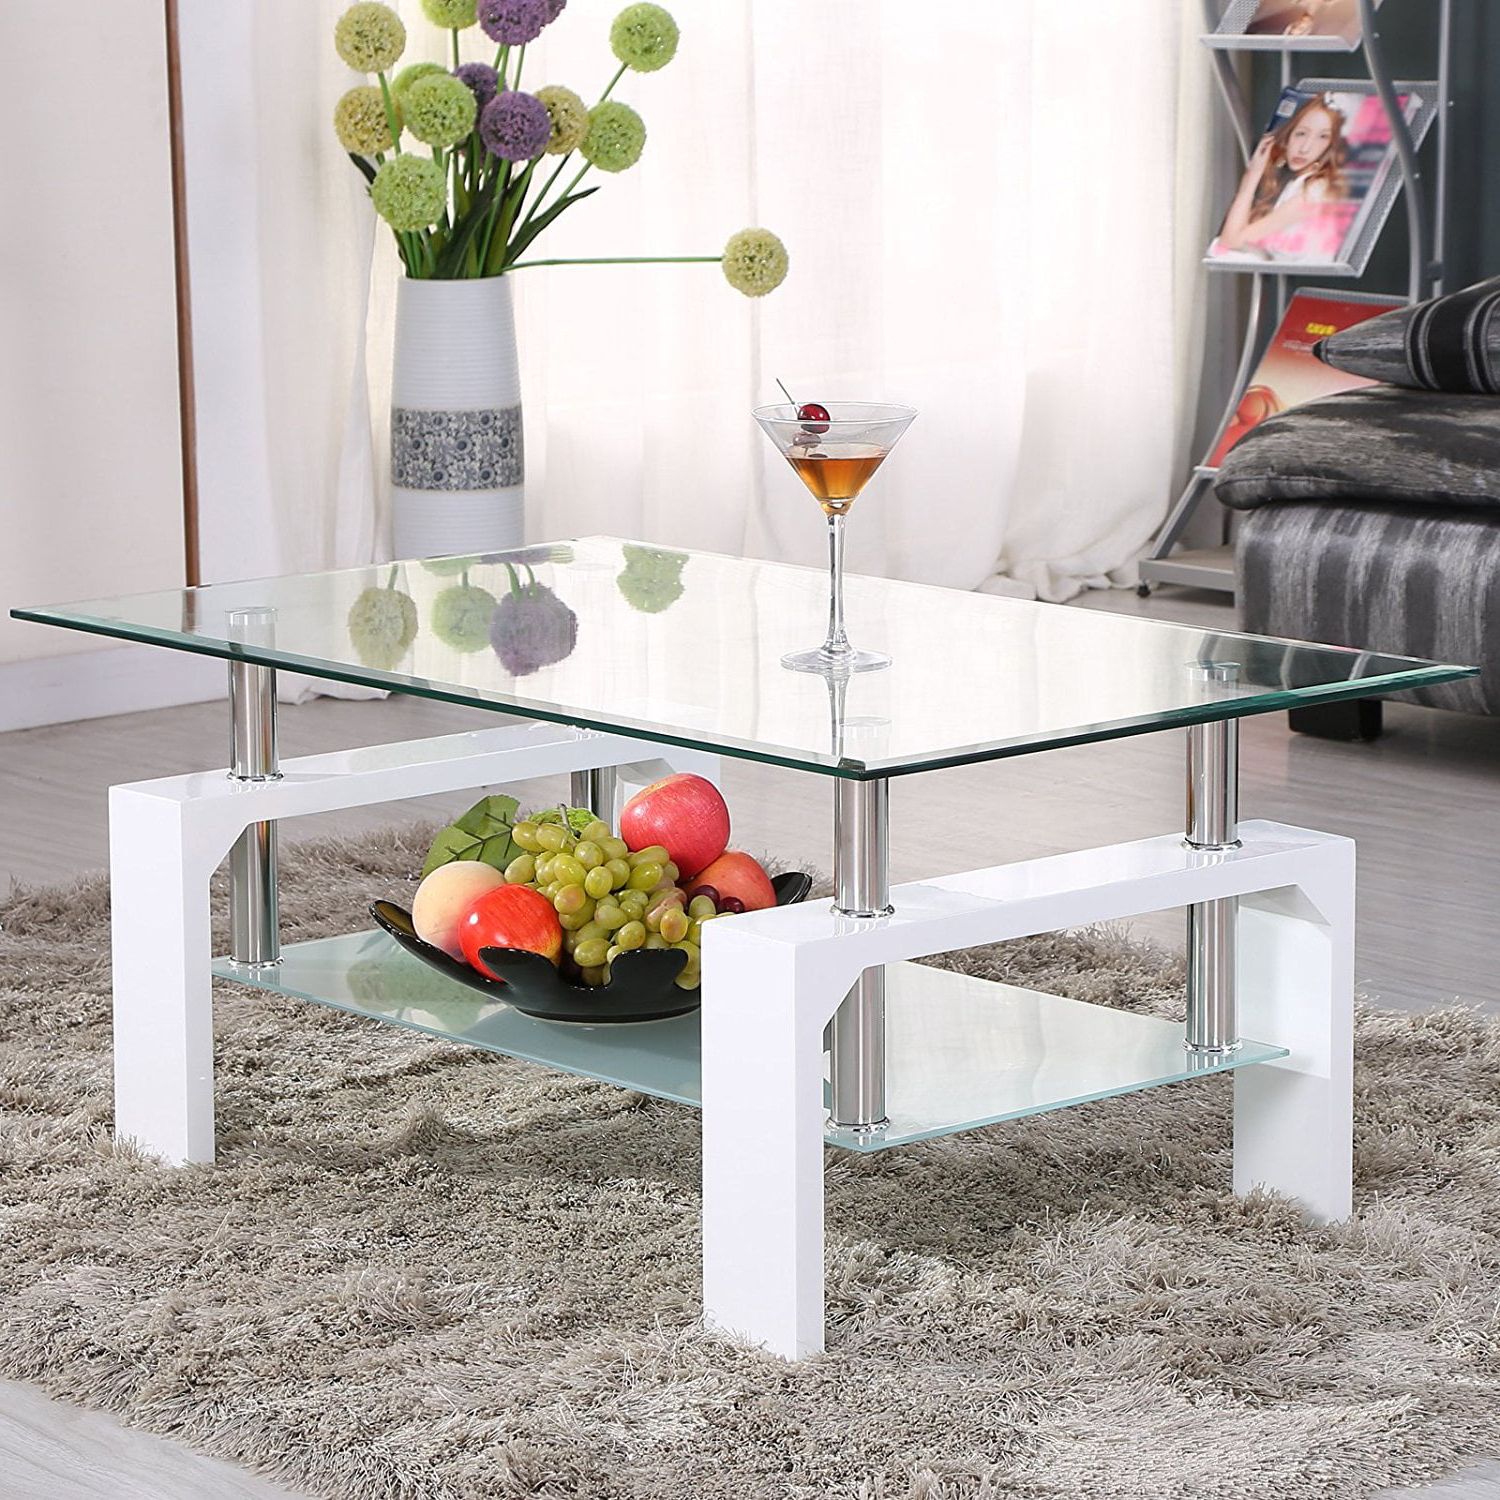 Uenjoy Rectangular Glass Coffee Table Shelf Chrome White Wood Living With Regard To Popular Wood Tempered Glass Top Coffee Tables (View 14 of 15)